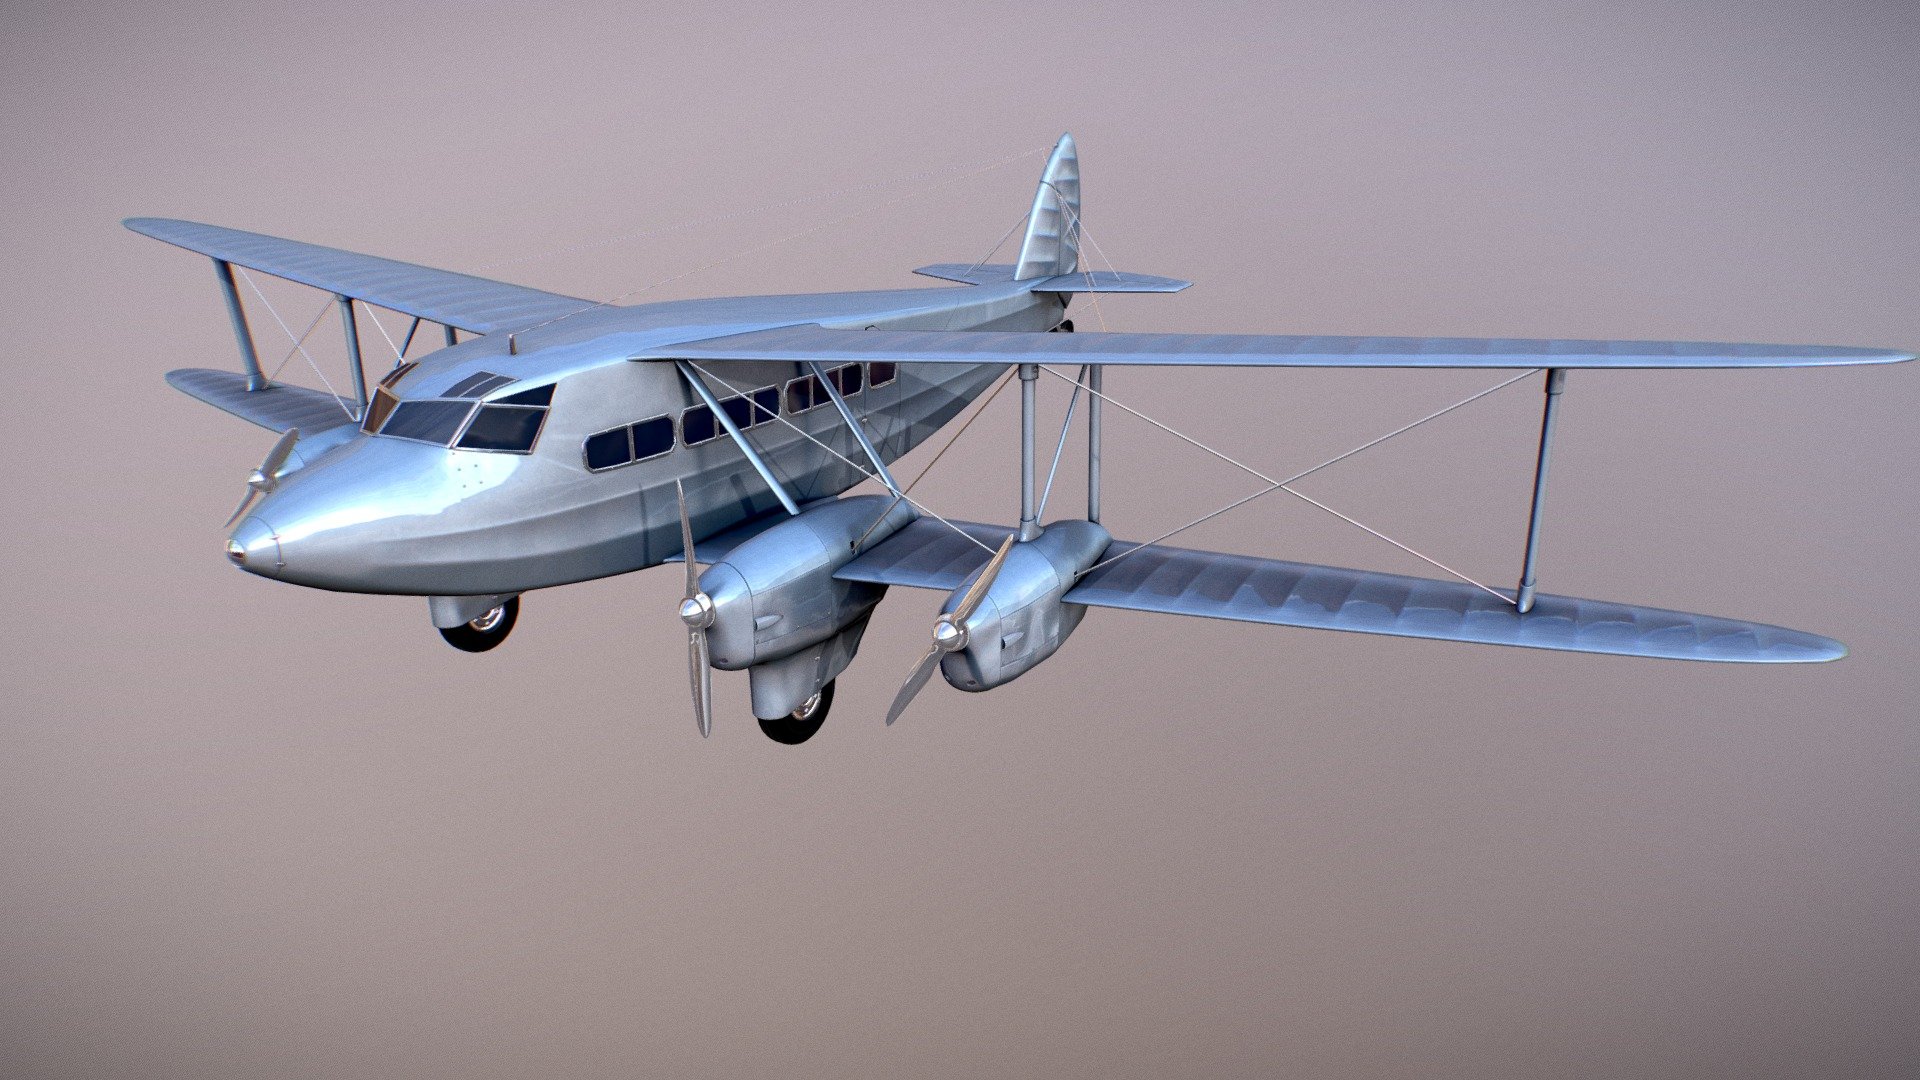 The de Havilland Express, also known as the de Havilland D.H.86, was a four-engined passenger aircraft manufactured by the de Havilland Aircraft Company between 1934 and 1937.

This aeroplane was 3D modelled for use in the 2020 Qantas in-flight safety video, which offers a glimpse into how air travel has changed over the past 100 years 3d model